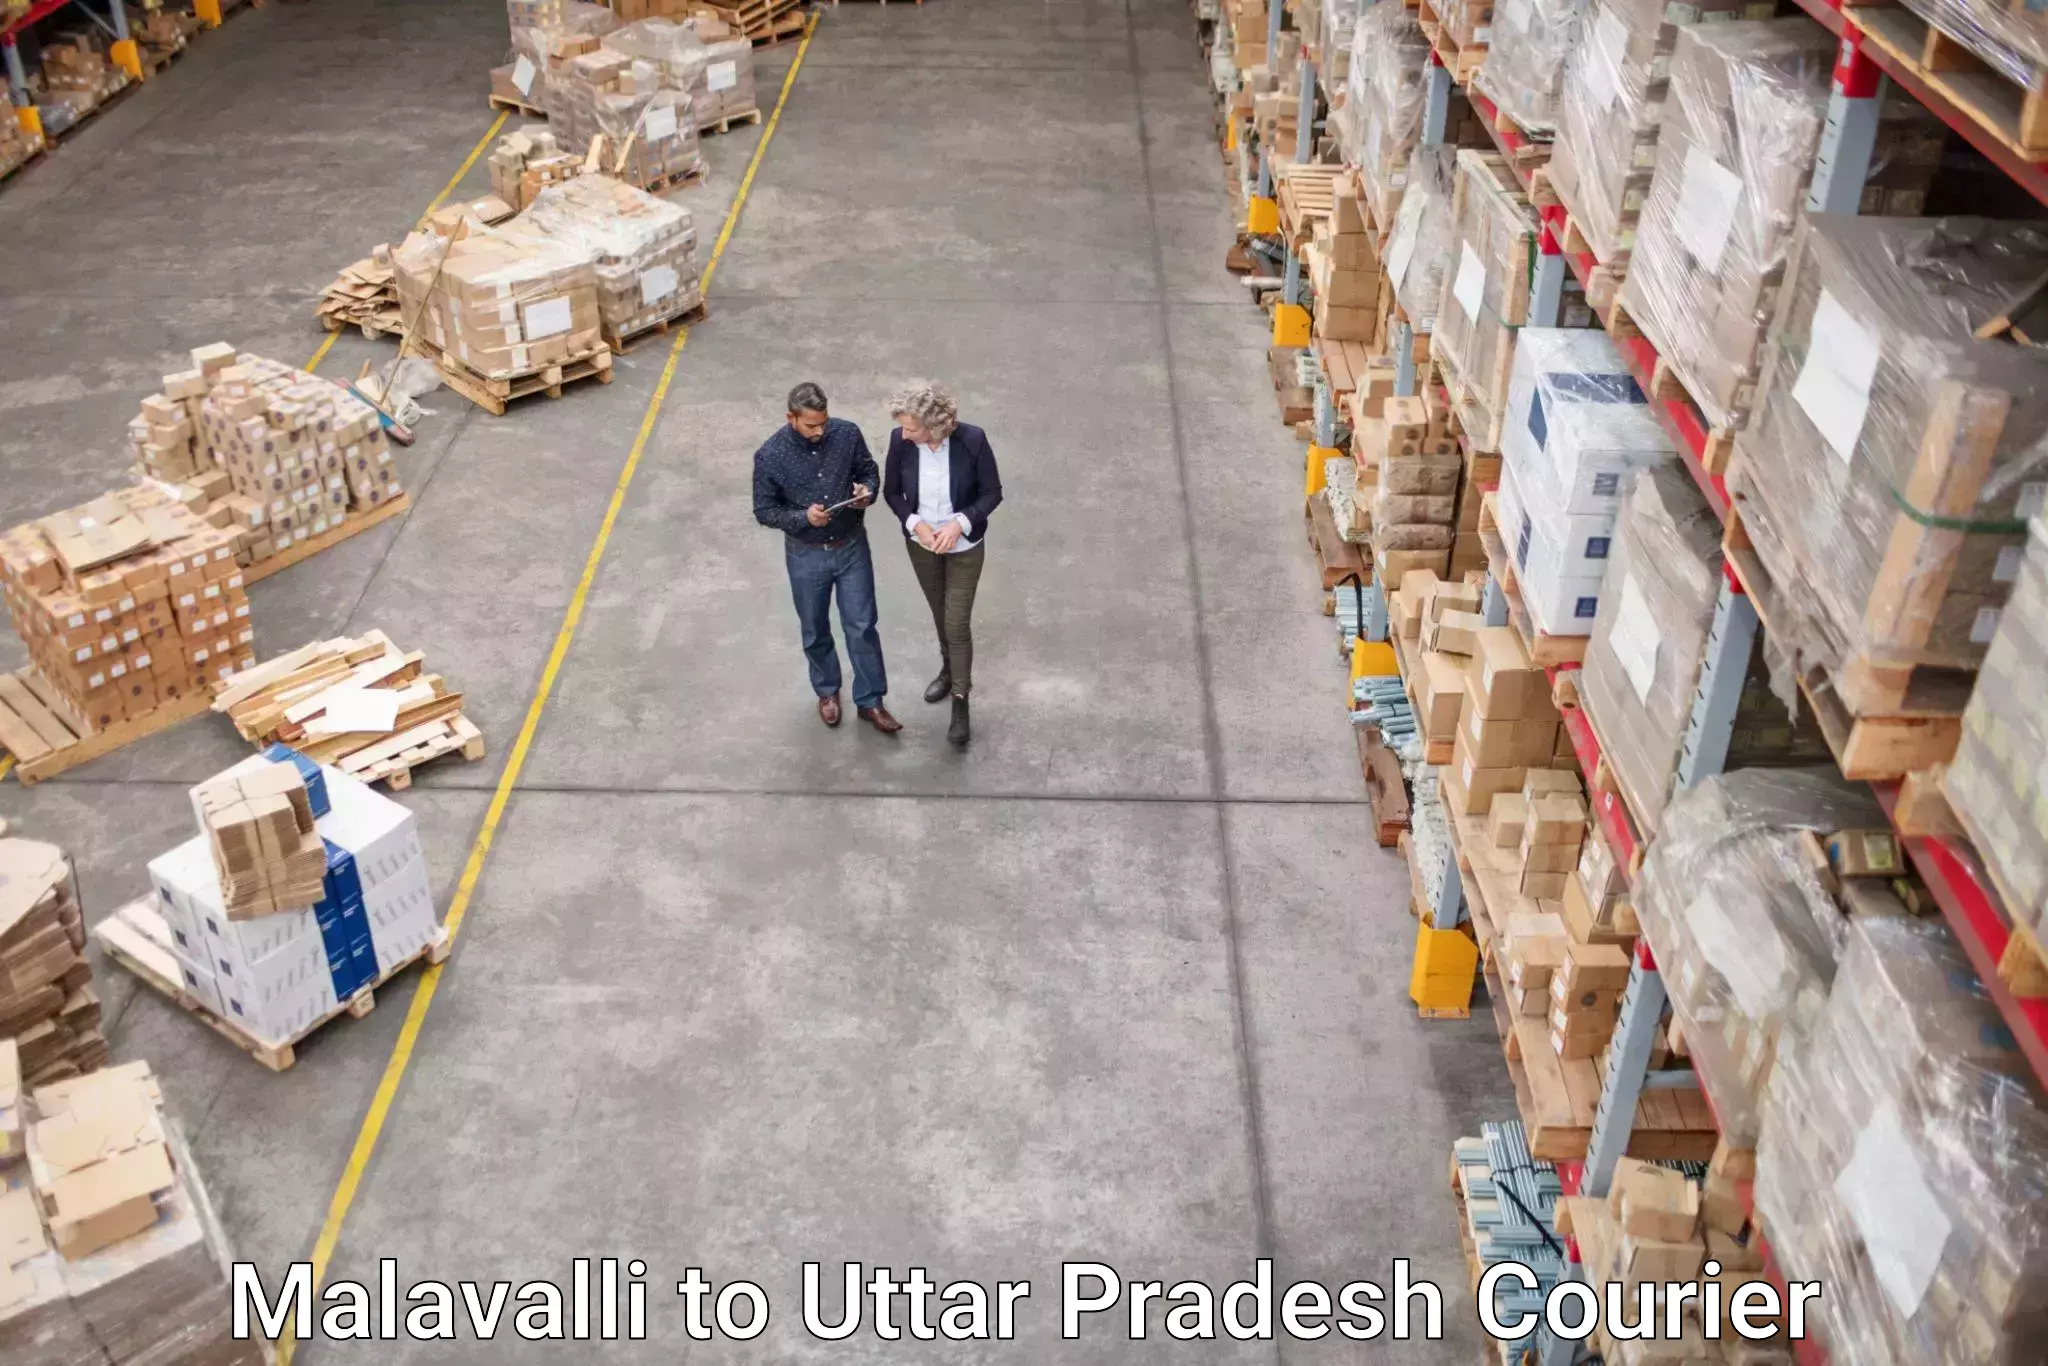 On-demand courier Malavalli to Agra